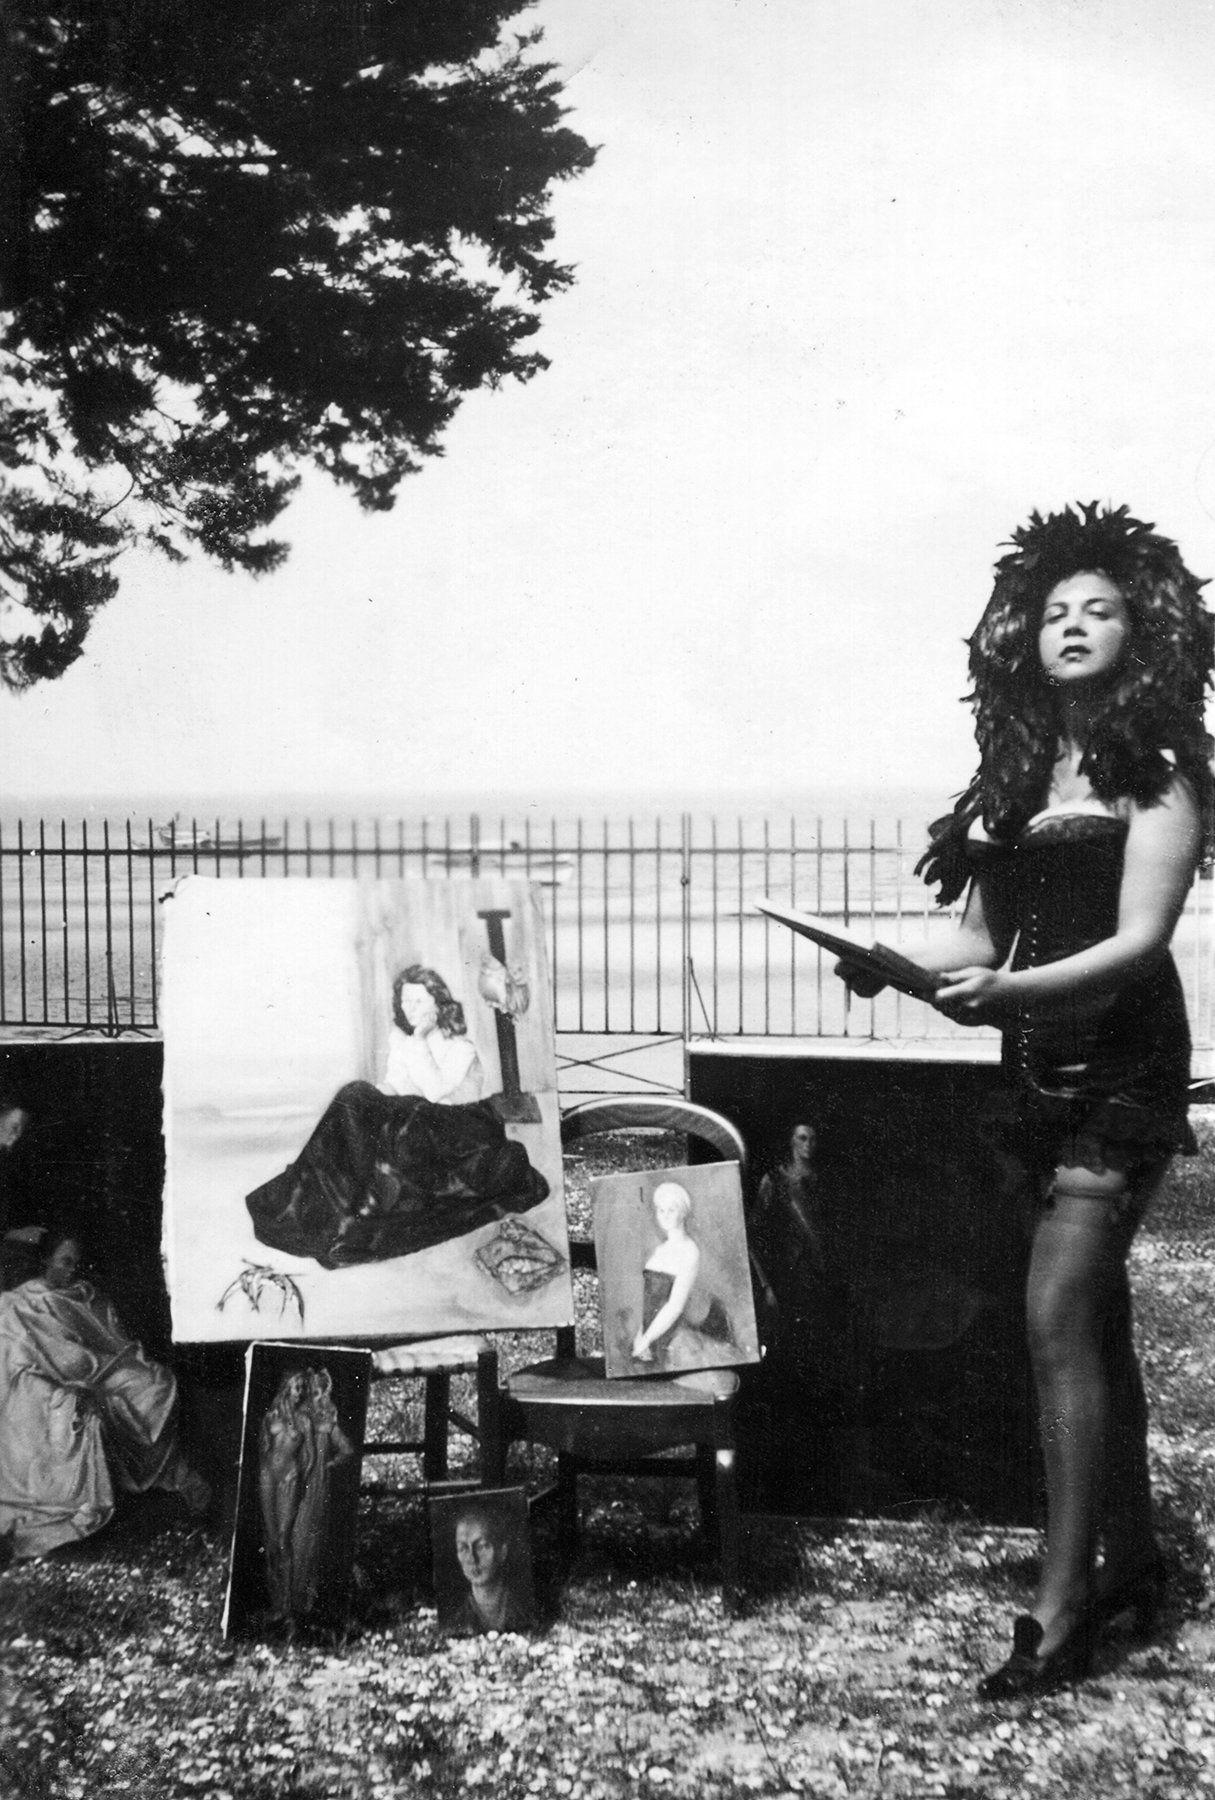 Leonor Fini painting in a feather headdress.